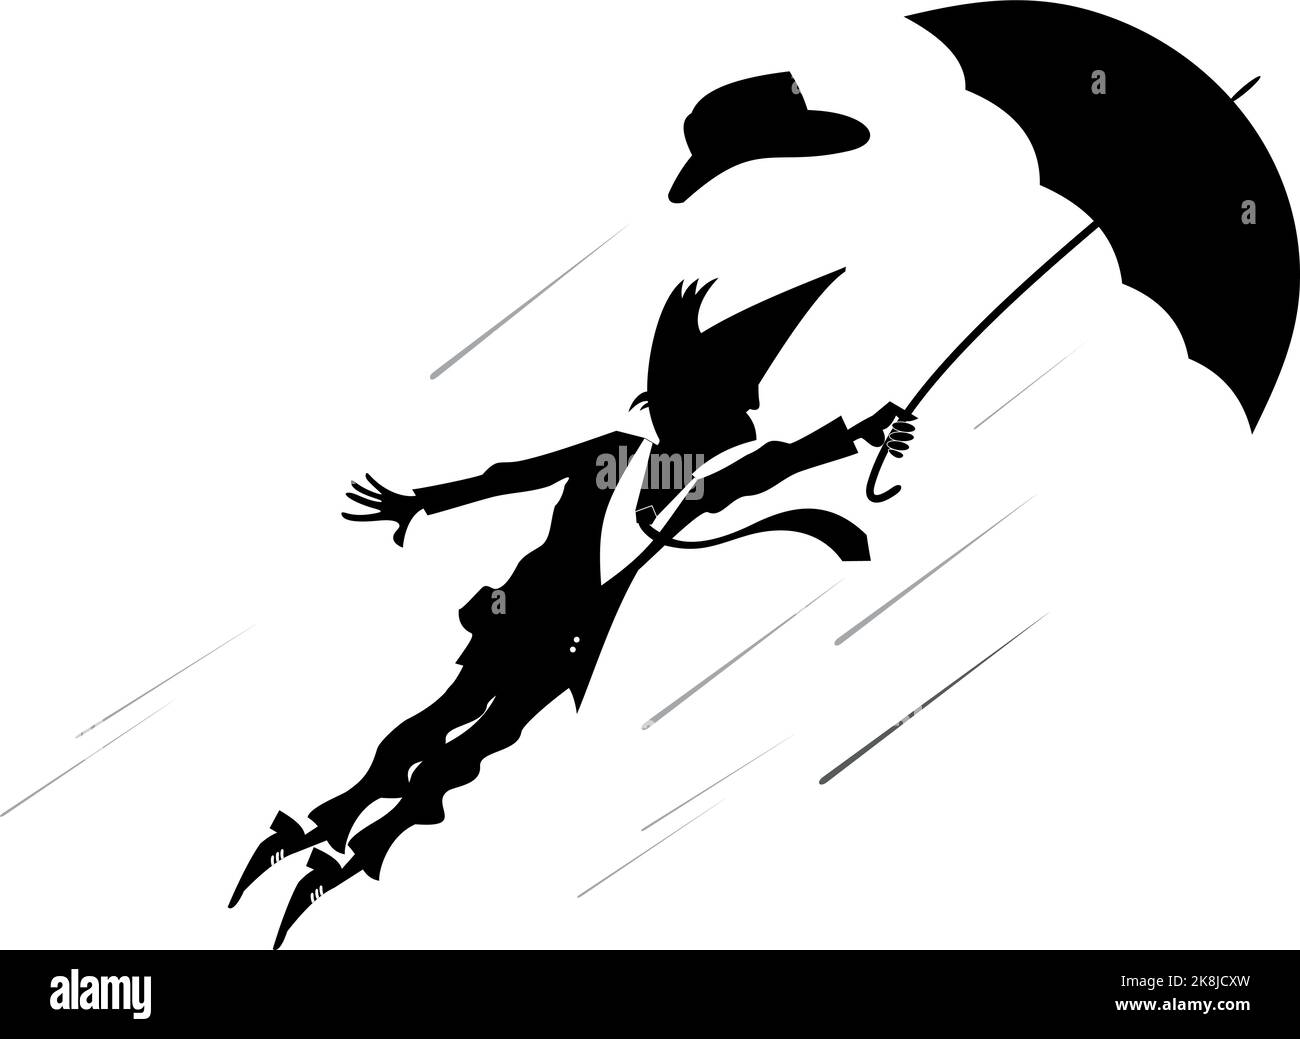 Windy day and man flies with umbrella illustration. Man with an umbrella gone with the wind silhouette black on white Stock Vector